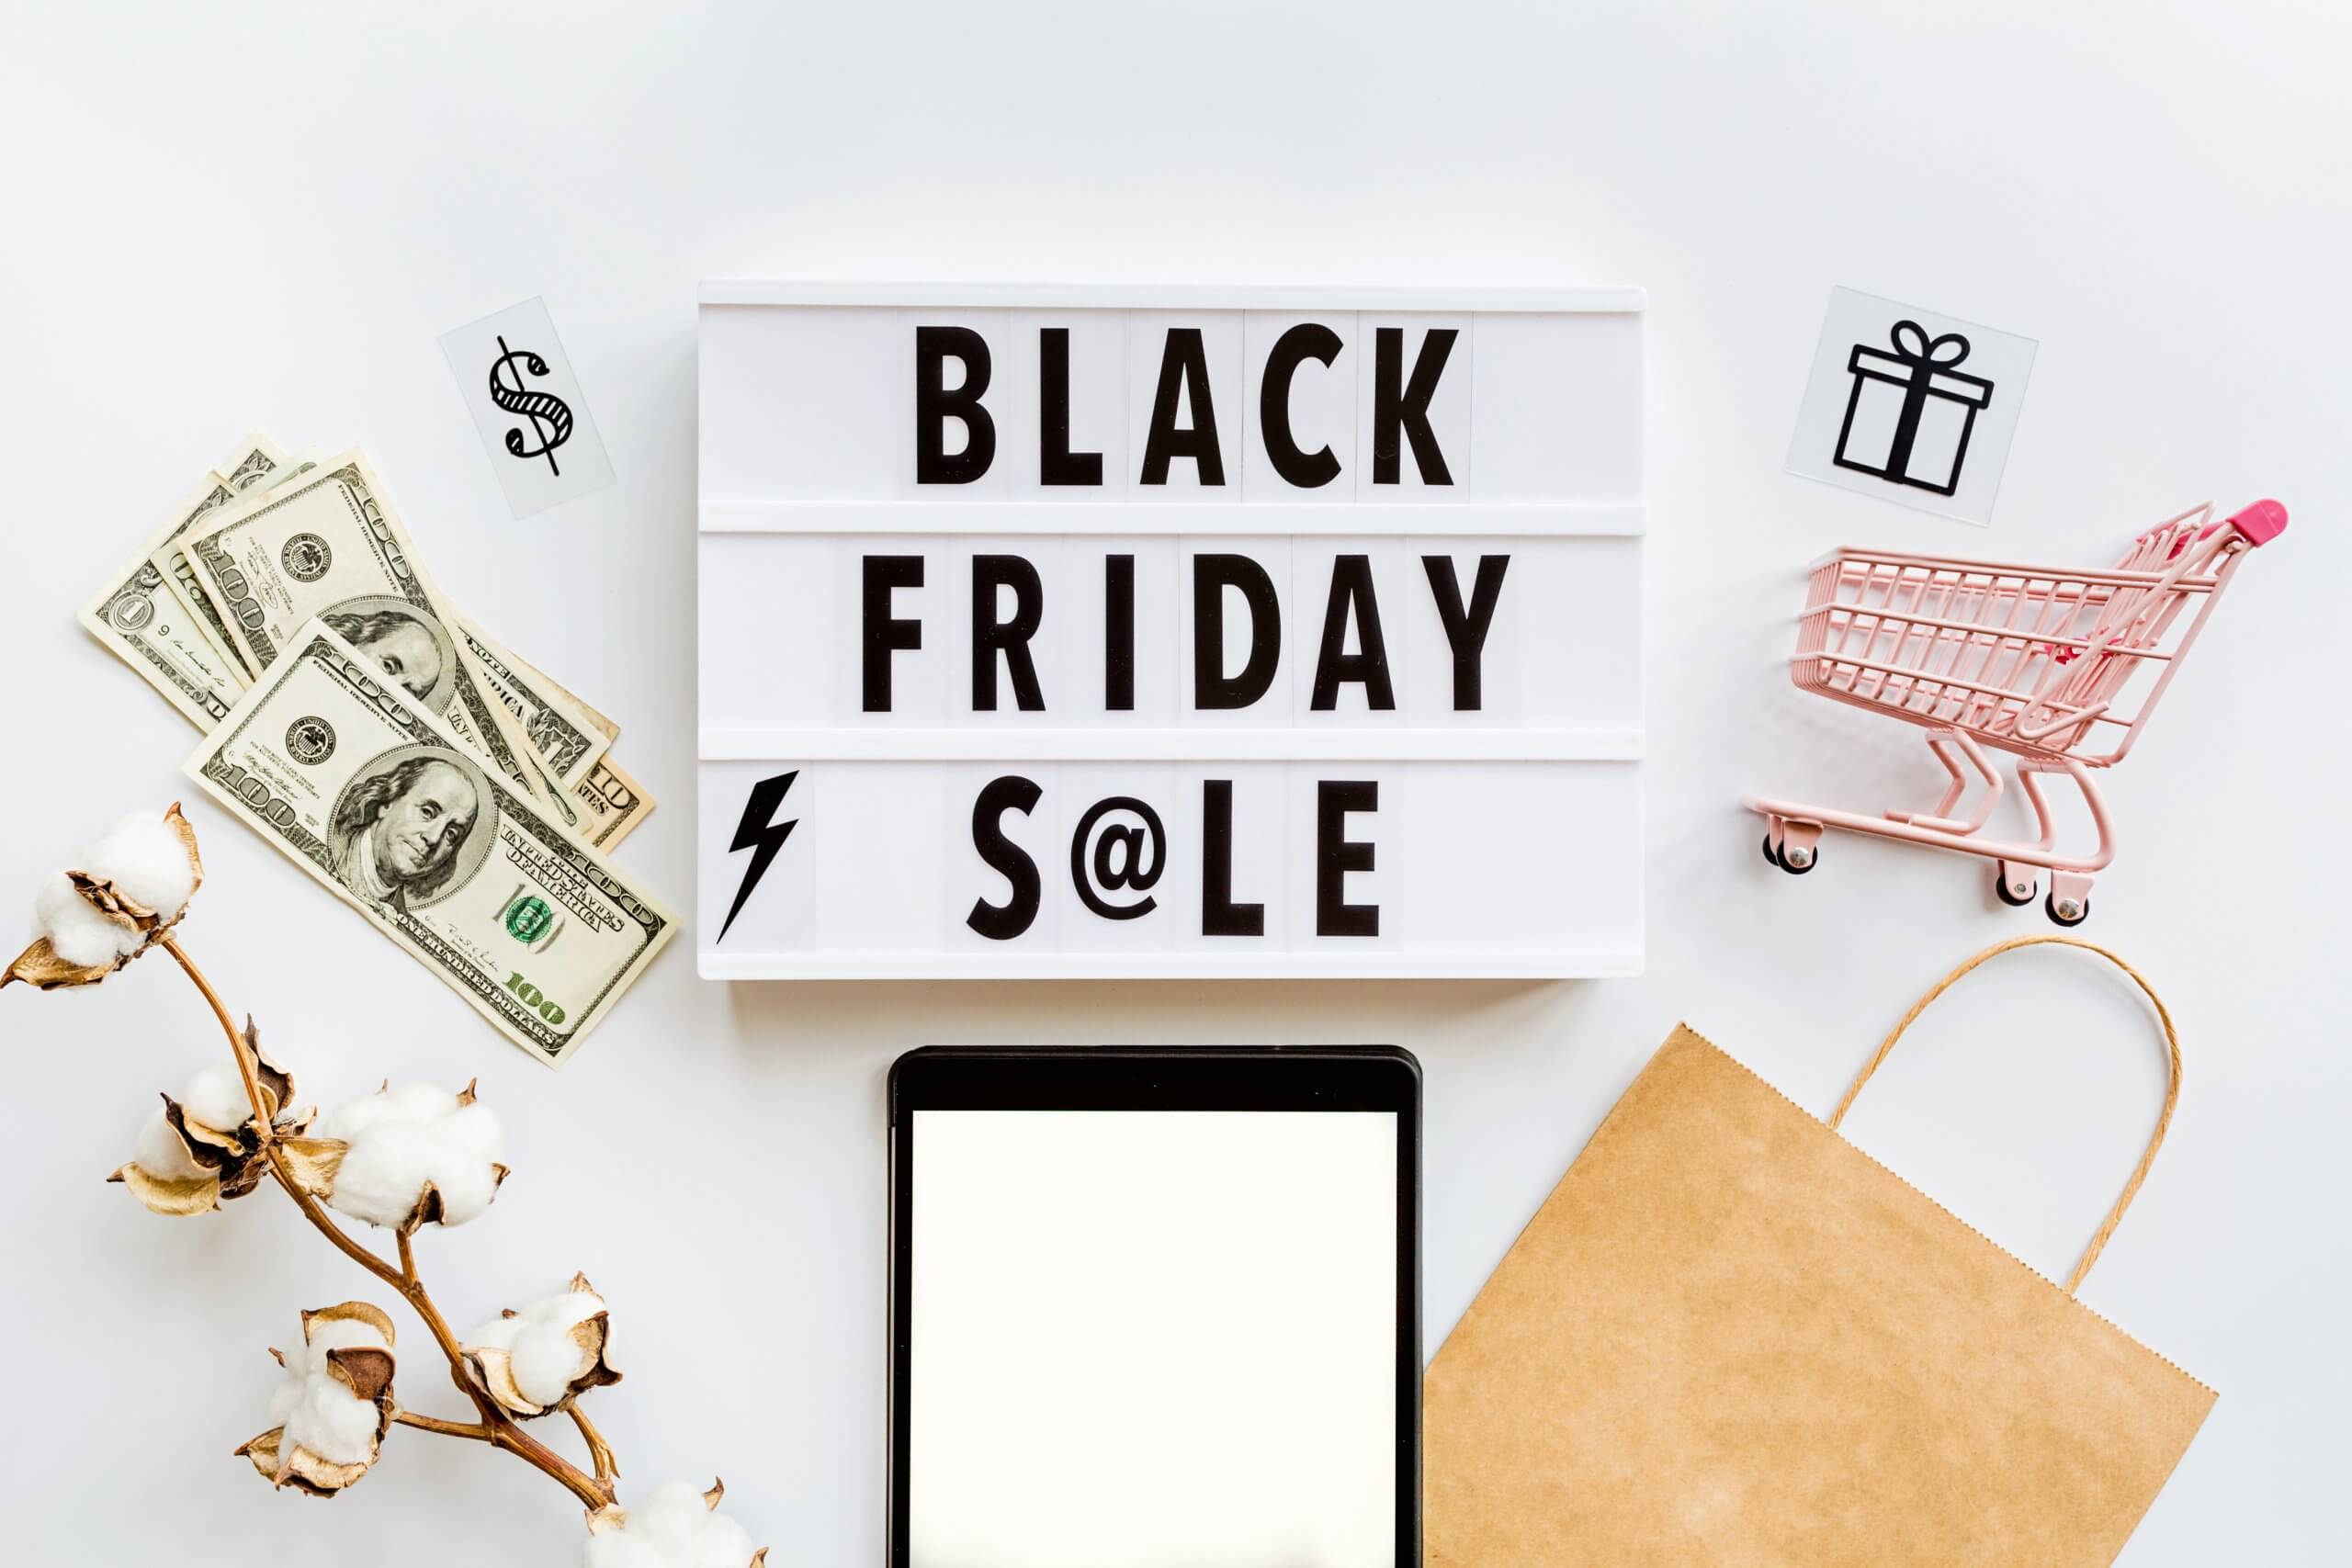 Top 10 Products To Sell On Black Friday